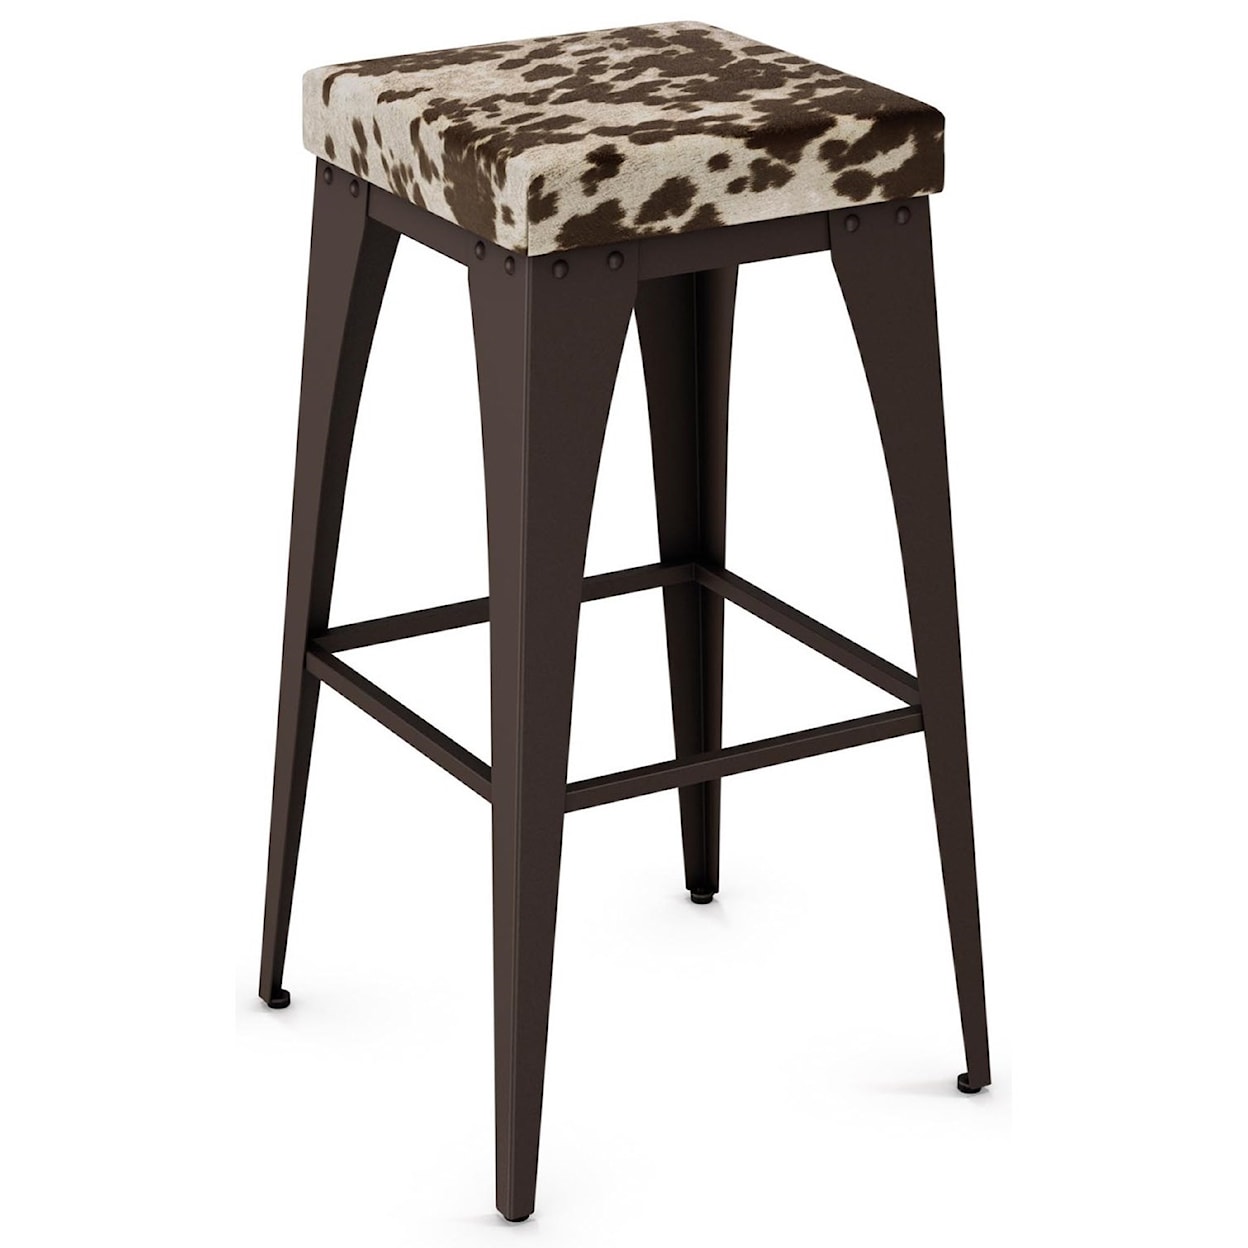 Amisco Industrial 30" Upright Stool with Upholstered Seat